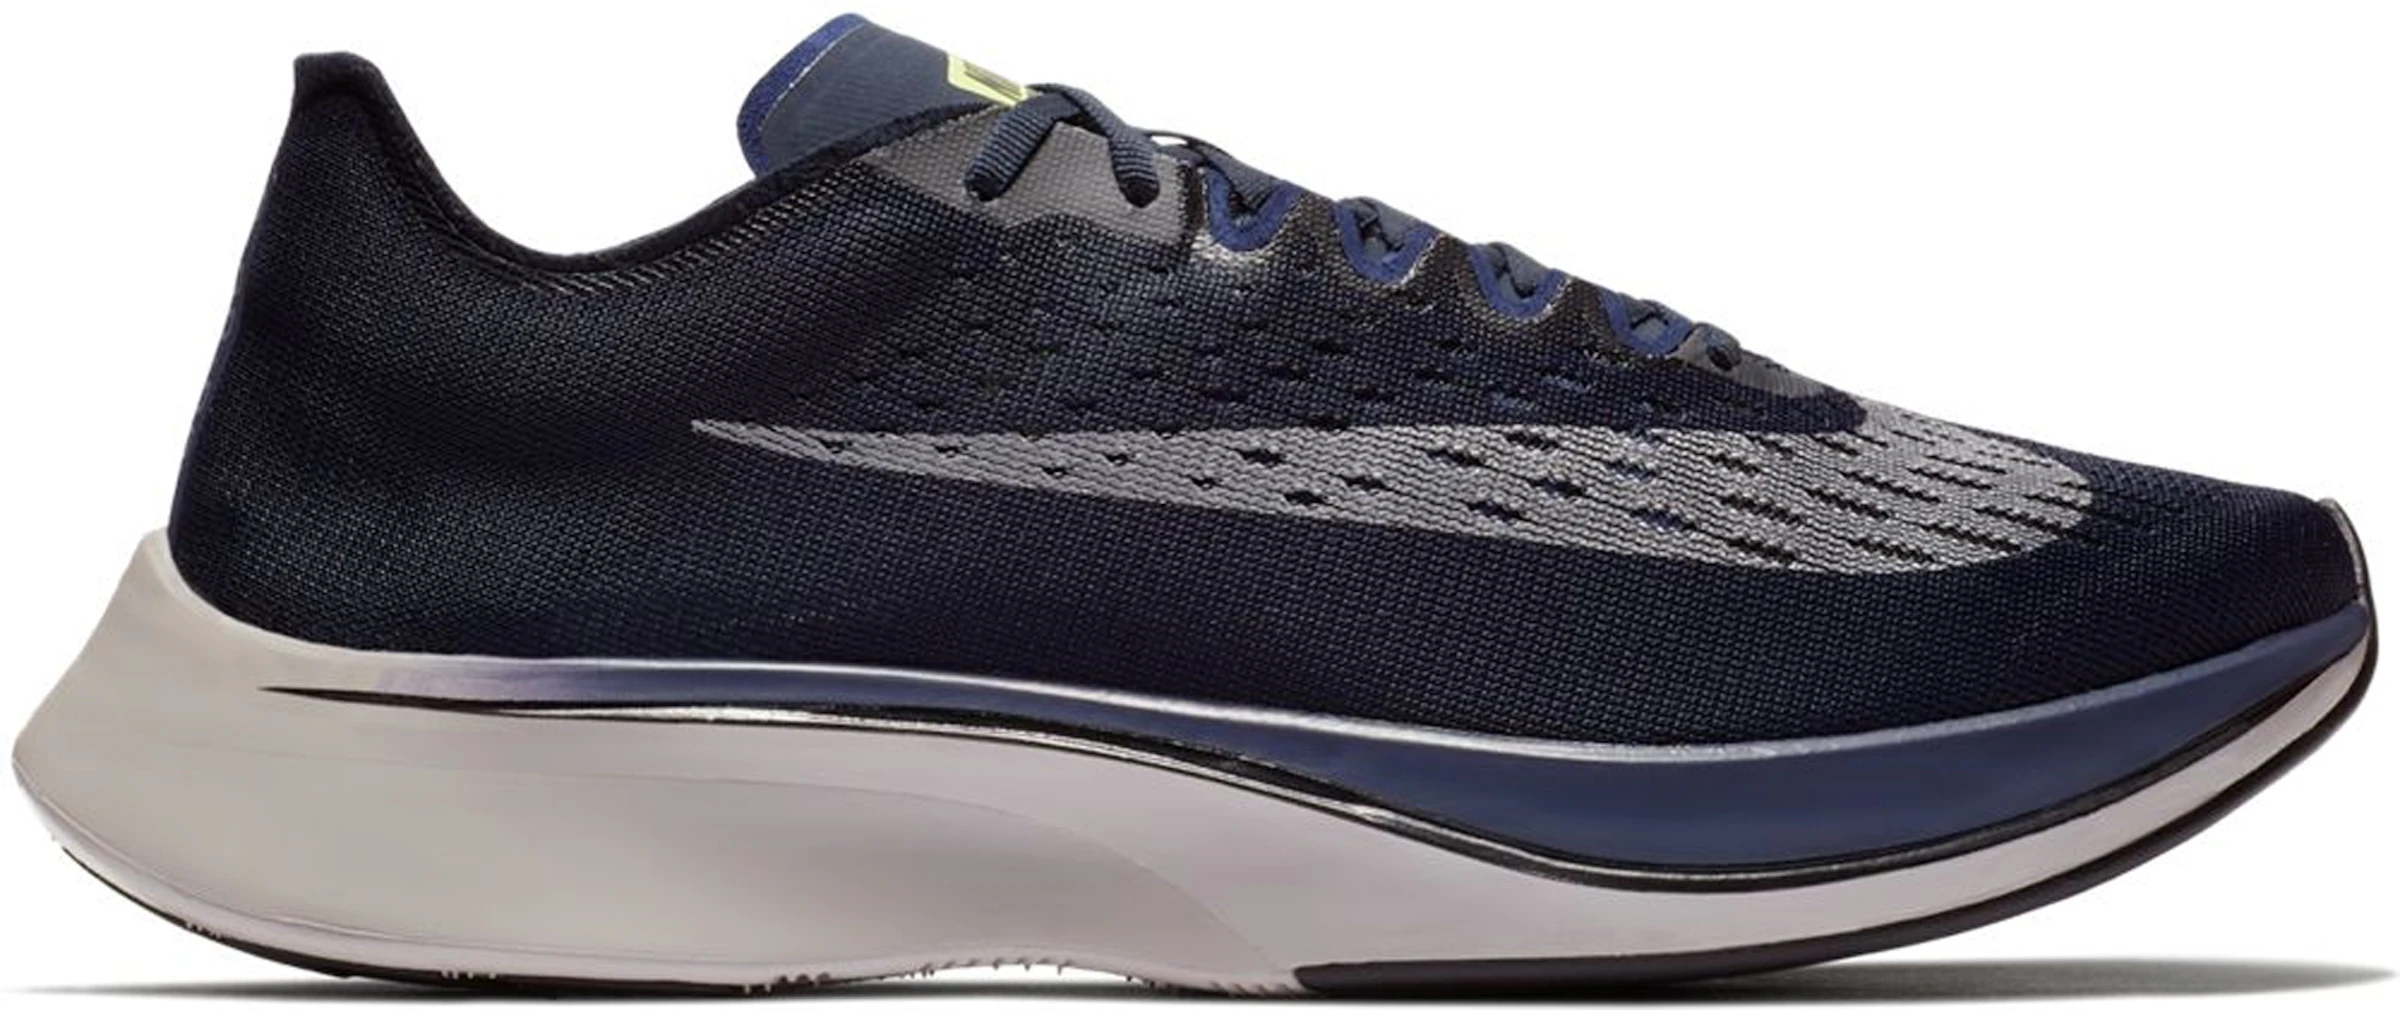 donor barricade inzet Nike Zoom Vaporfly 4% Obsidian - 880847-405 - US